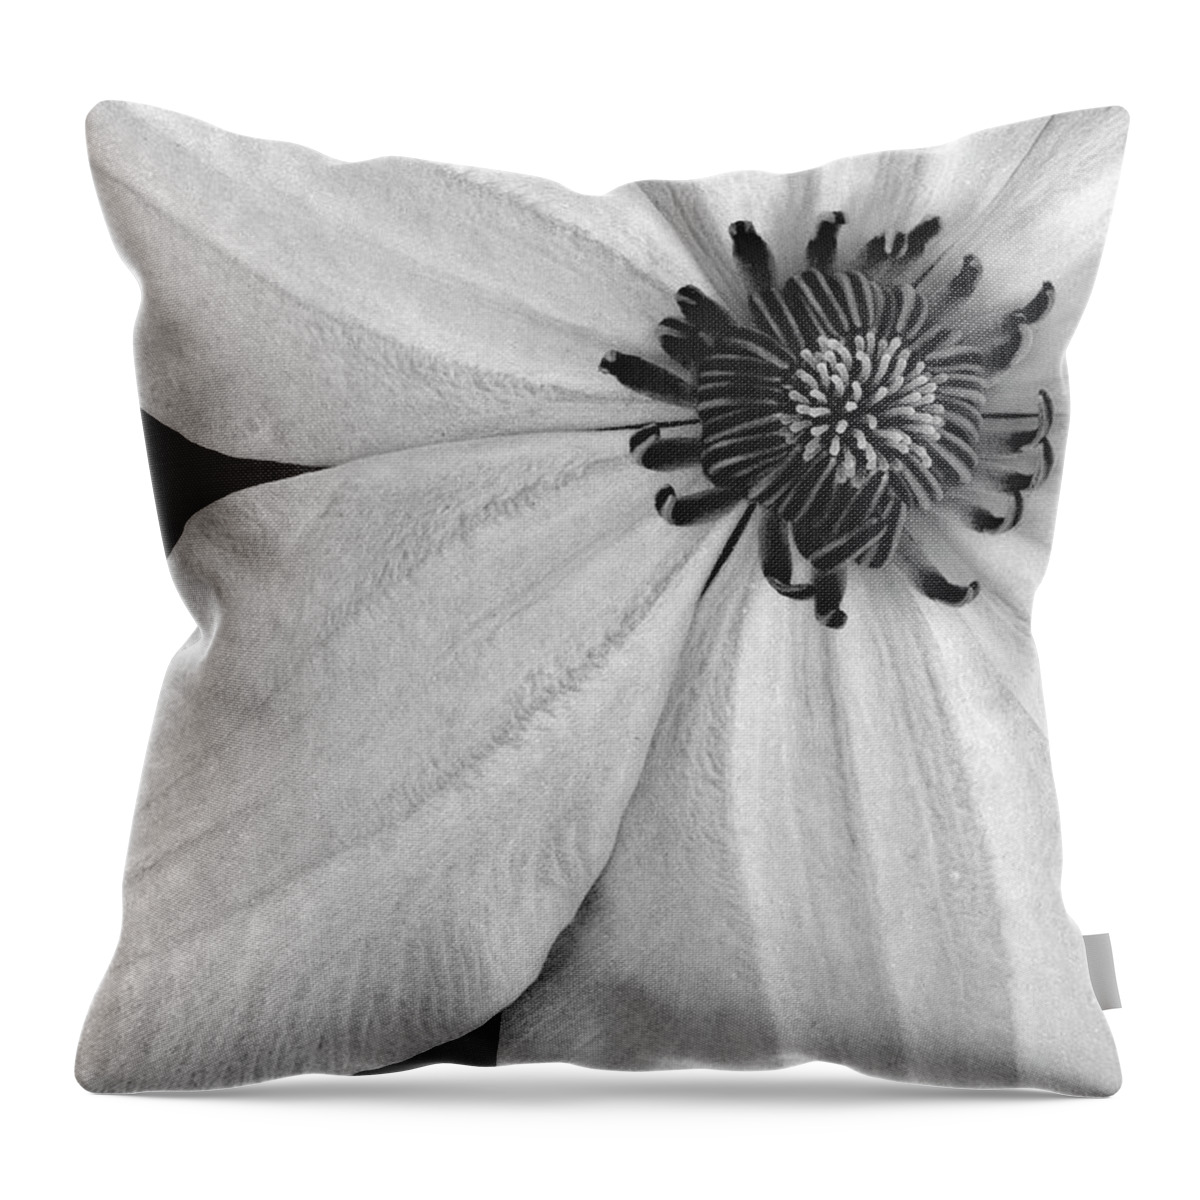 Clematis Throw Pillow featuring the photograph Clematis Flower BW by Susan Candelario